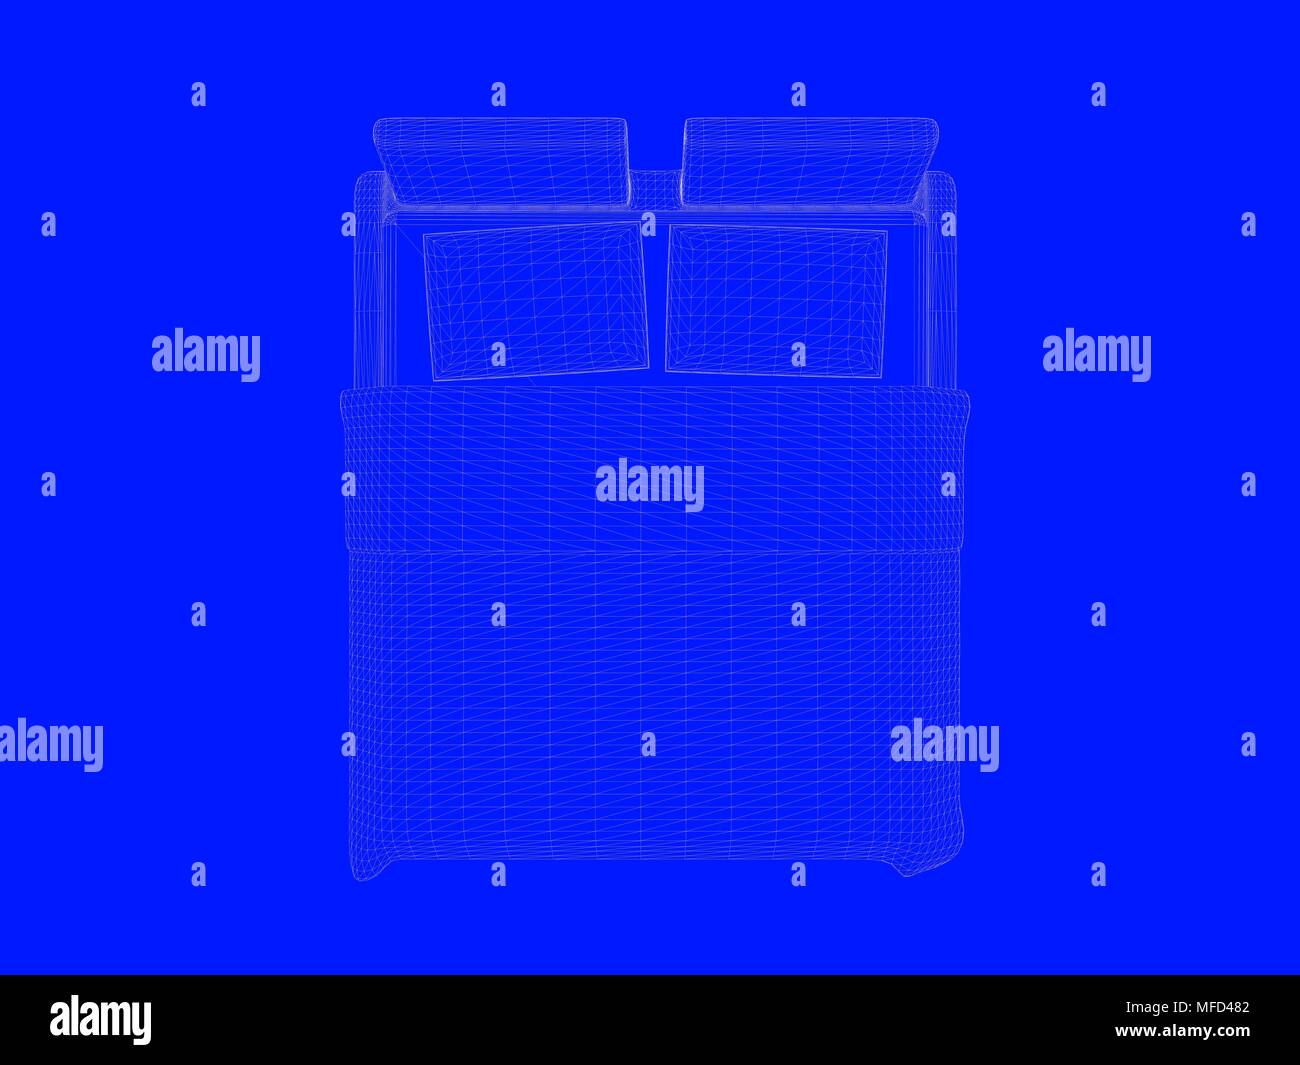 3d rendering of a bed blueprint as lines on a blue background Stock Photo